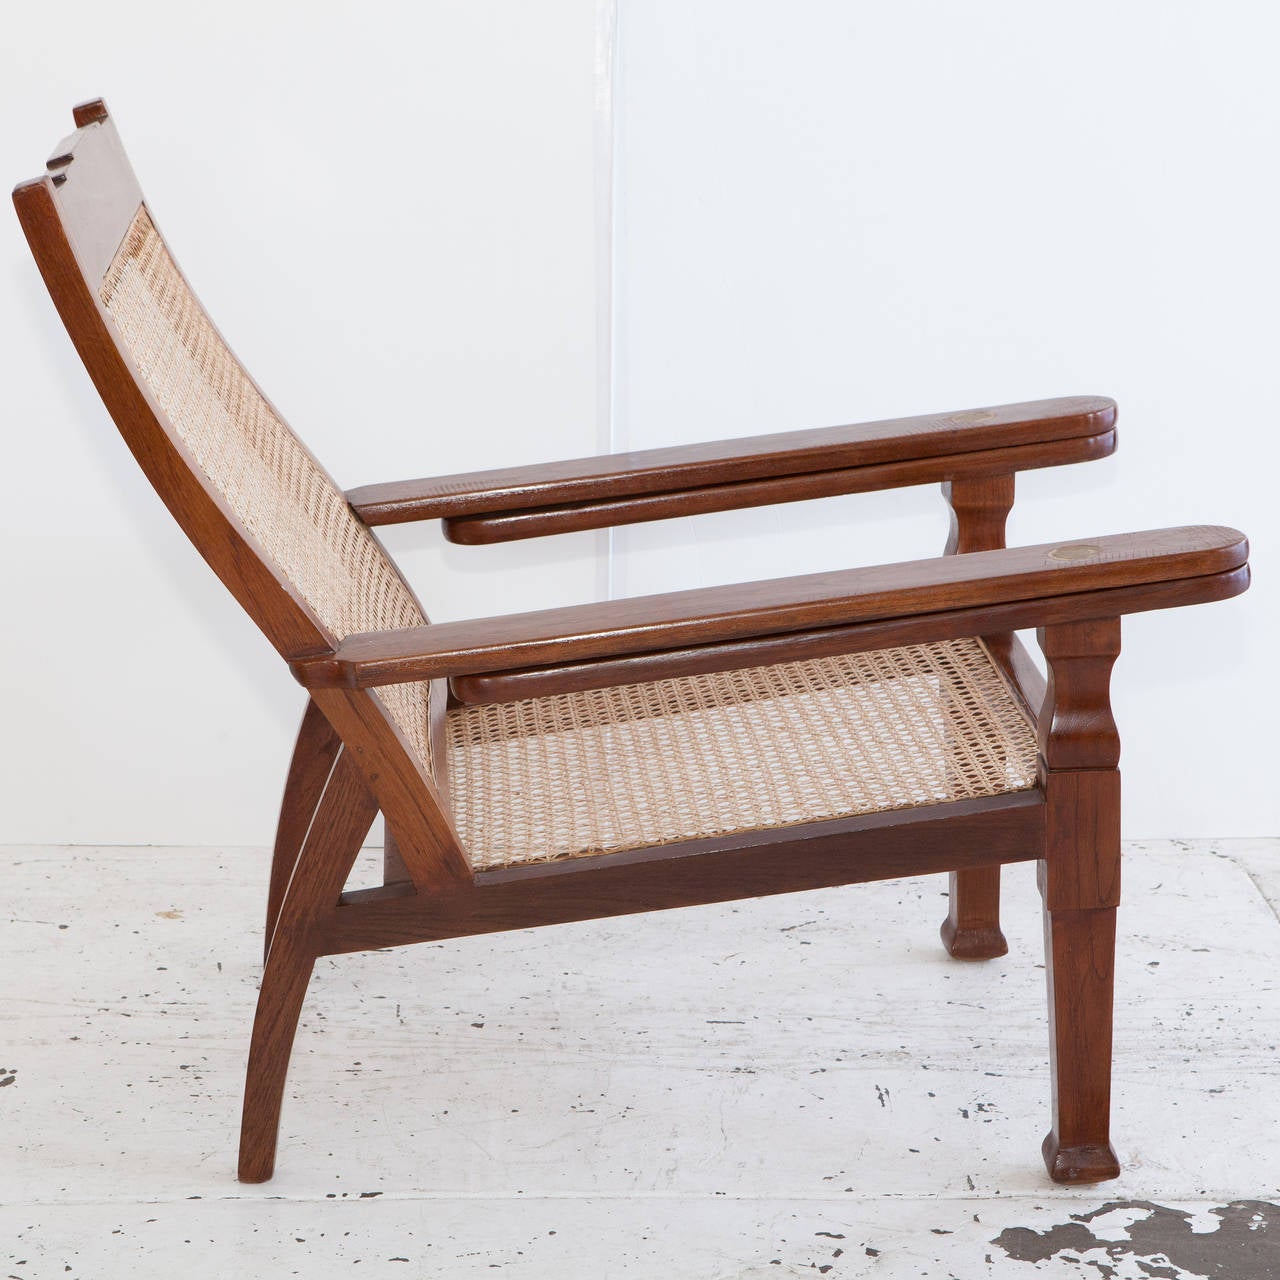 20th Century Anglo-Indian Teak Plantation Chair